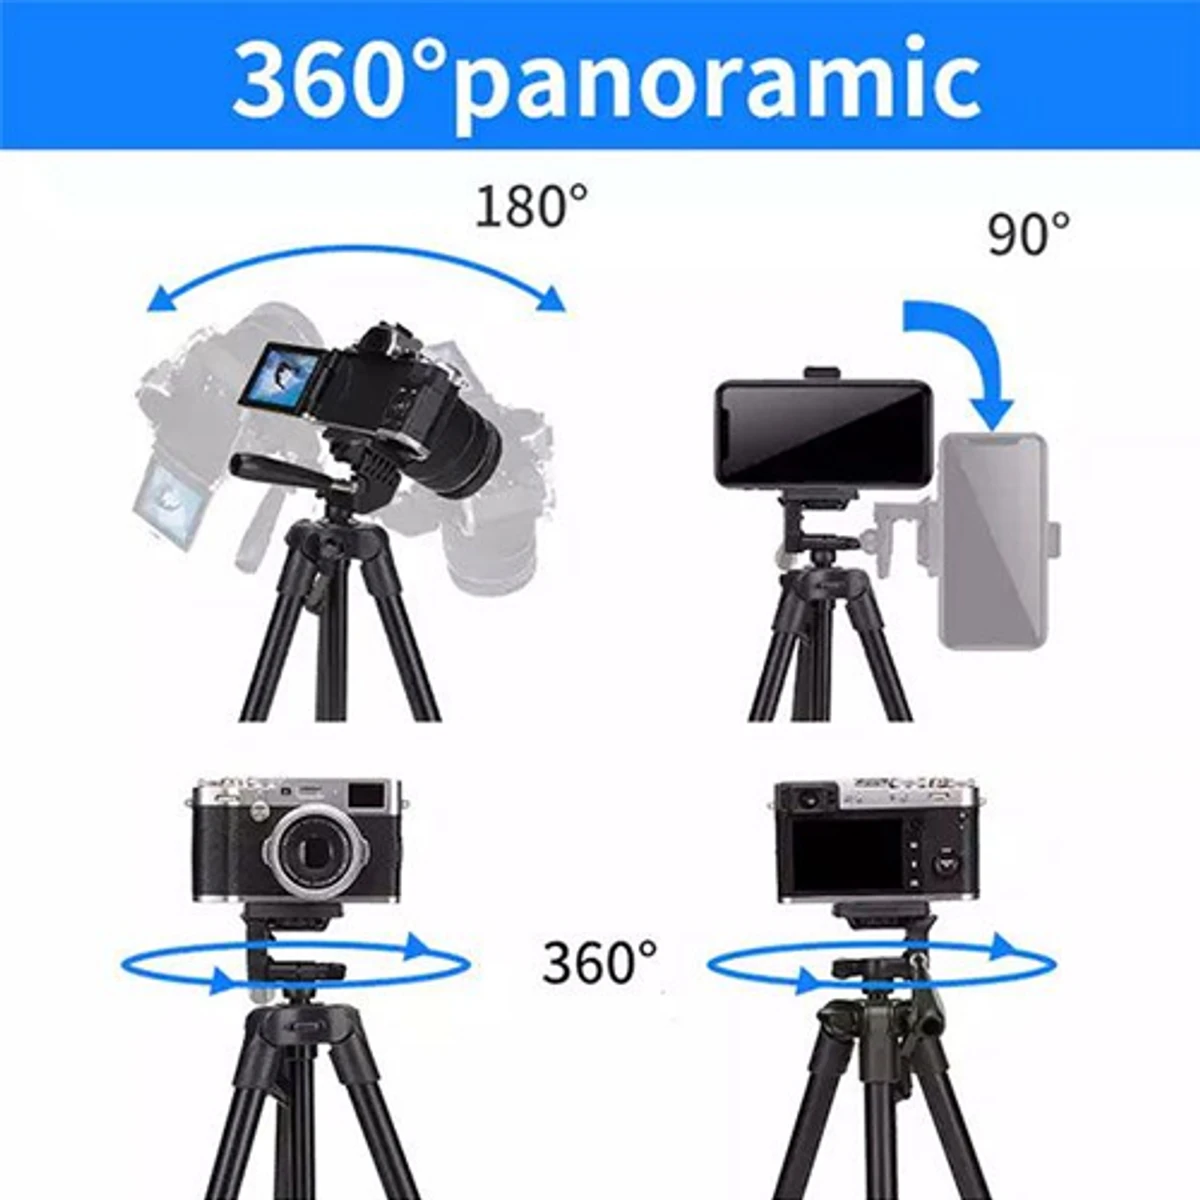 Jmary KP-2205 Tripod With Mobile Holder